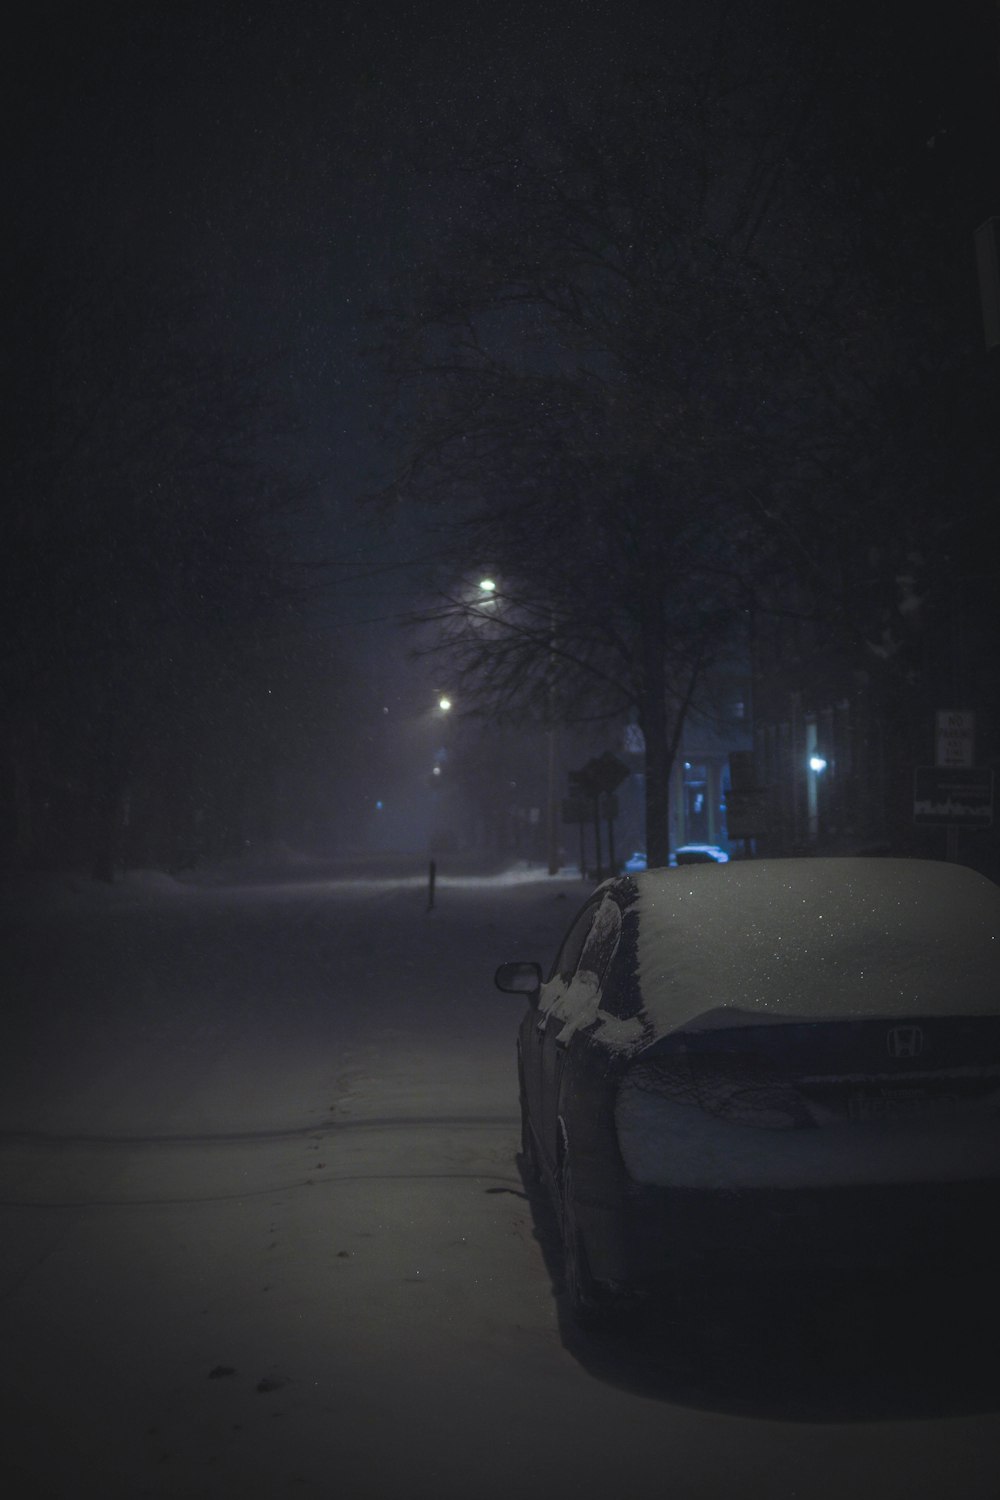 a car parked on a snowy street at night